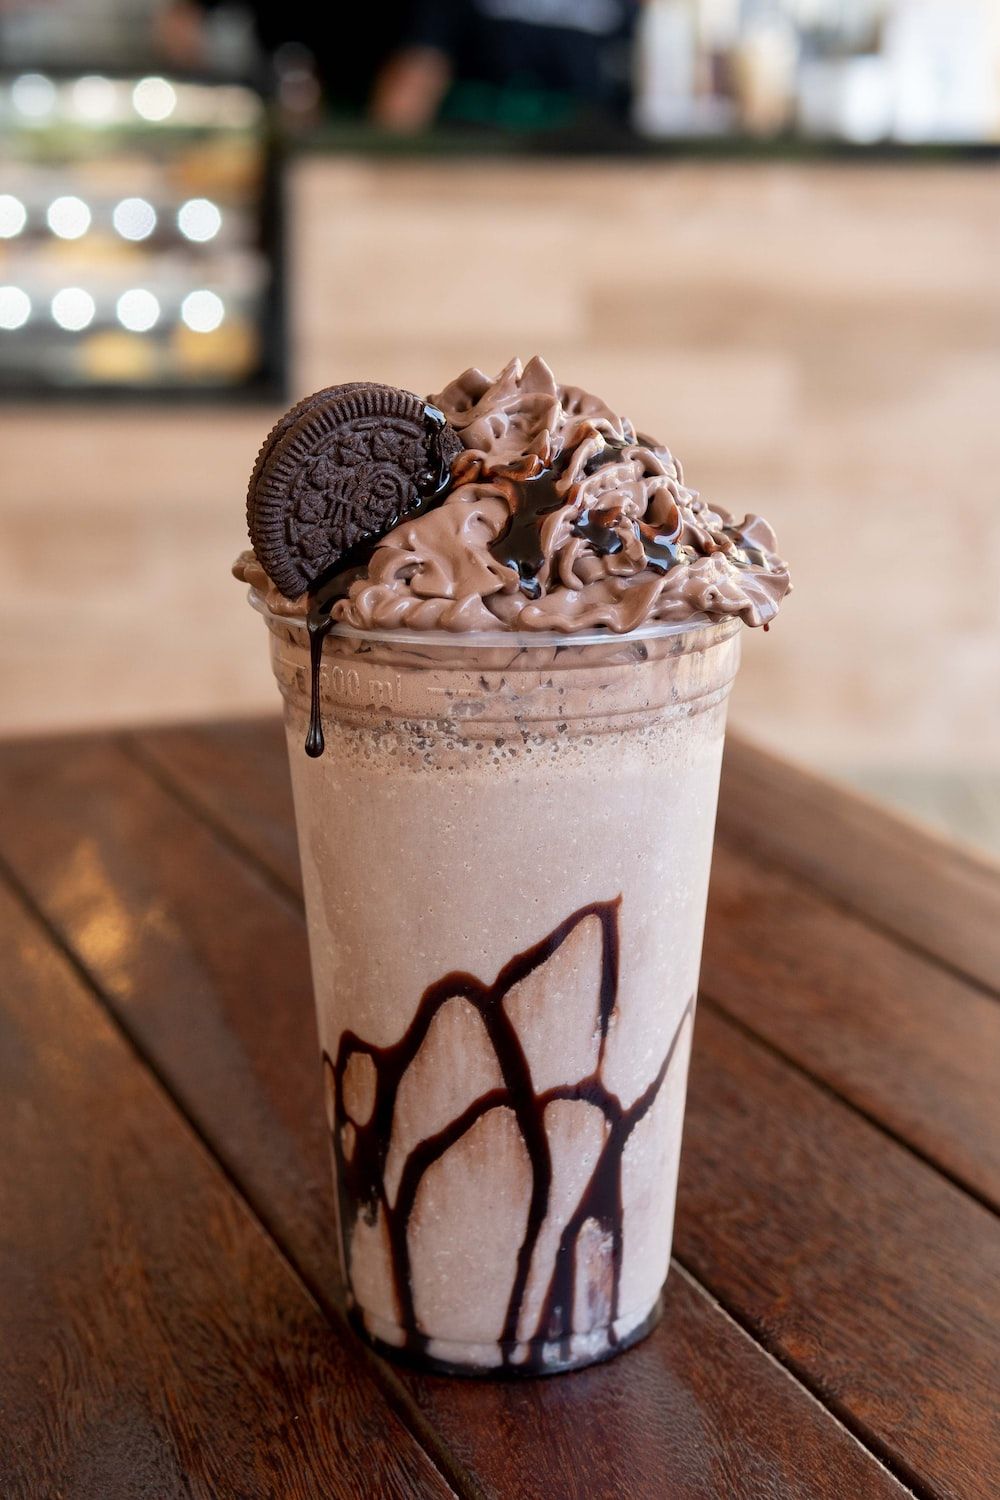 A milkshake with Oreo cookie and chocolate drizzle on top - Oreo